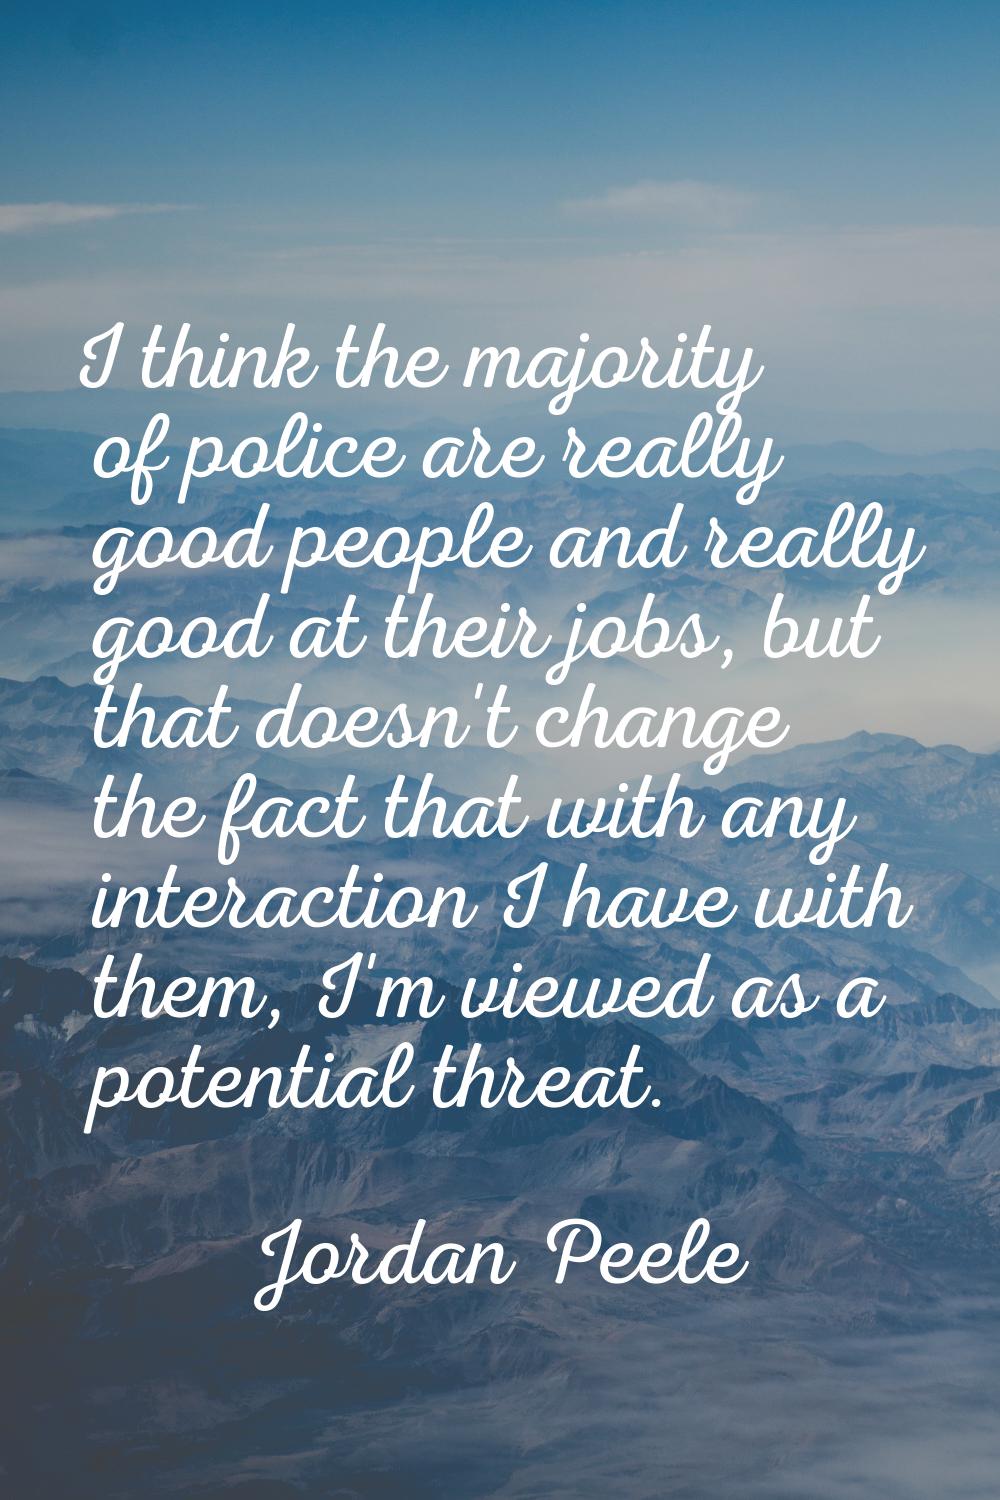 I think the majority of police are really good people and really good at their jobs, but that doesn